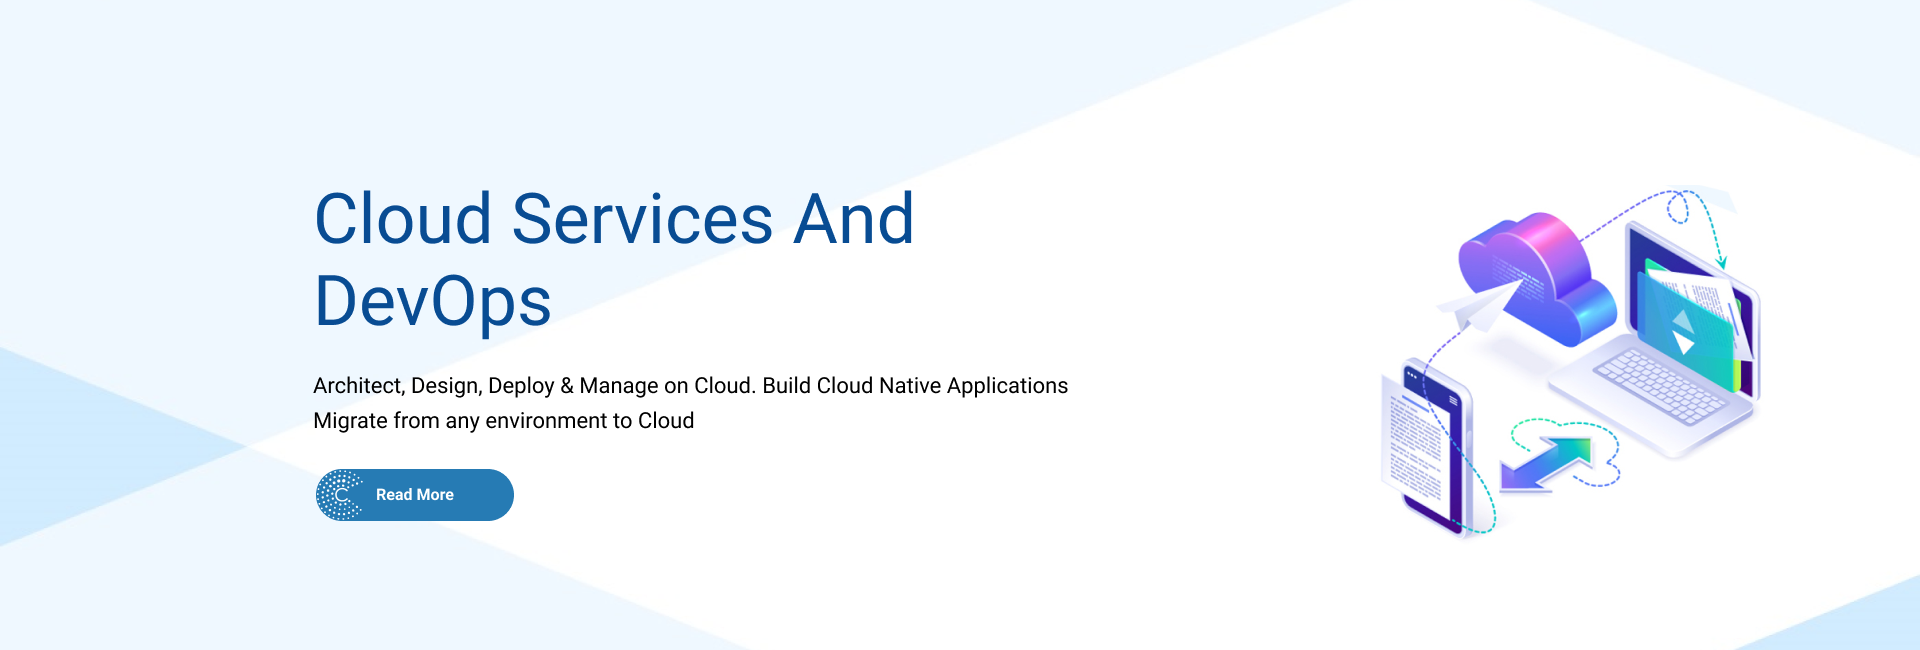 Cloud Services and DevOps - Architect, Design, Deploy & Manage on Cloud. Build Cloud Native Applications. Migrate from any environment to cloud